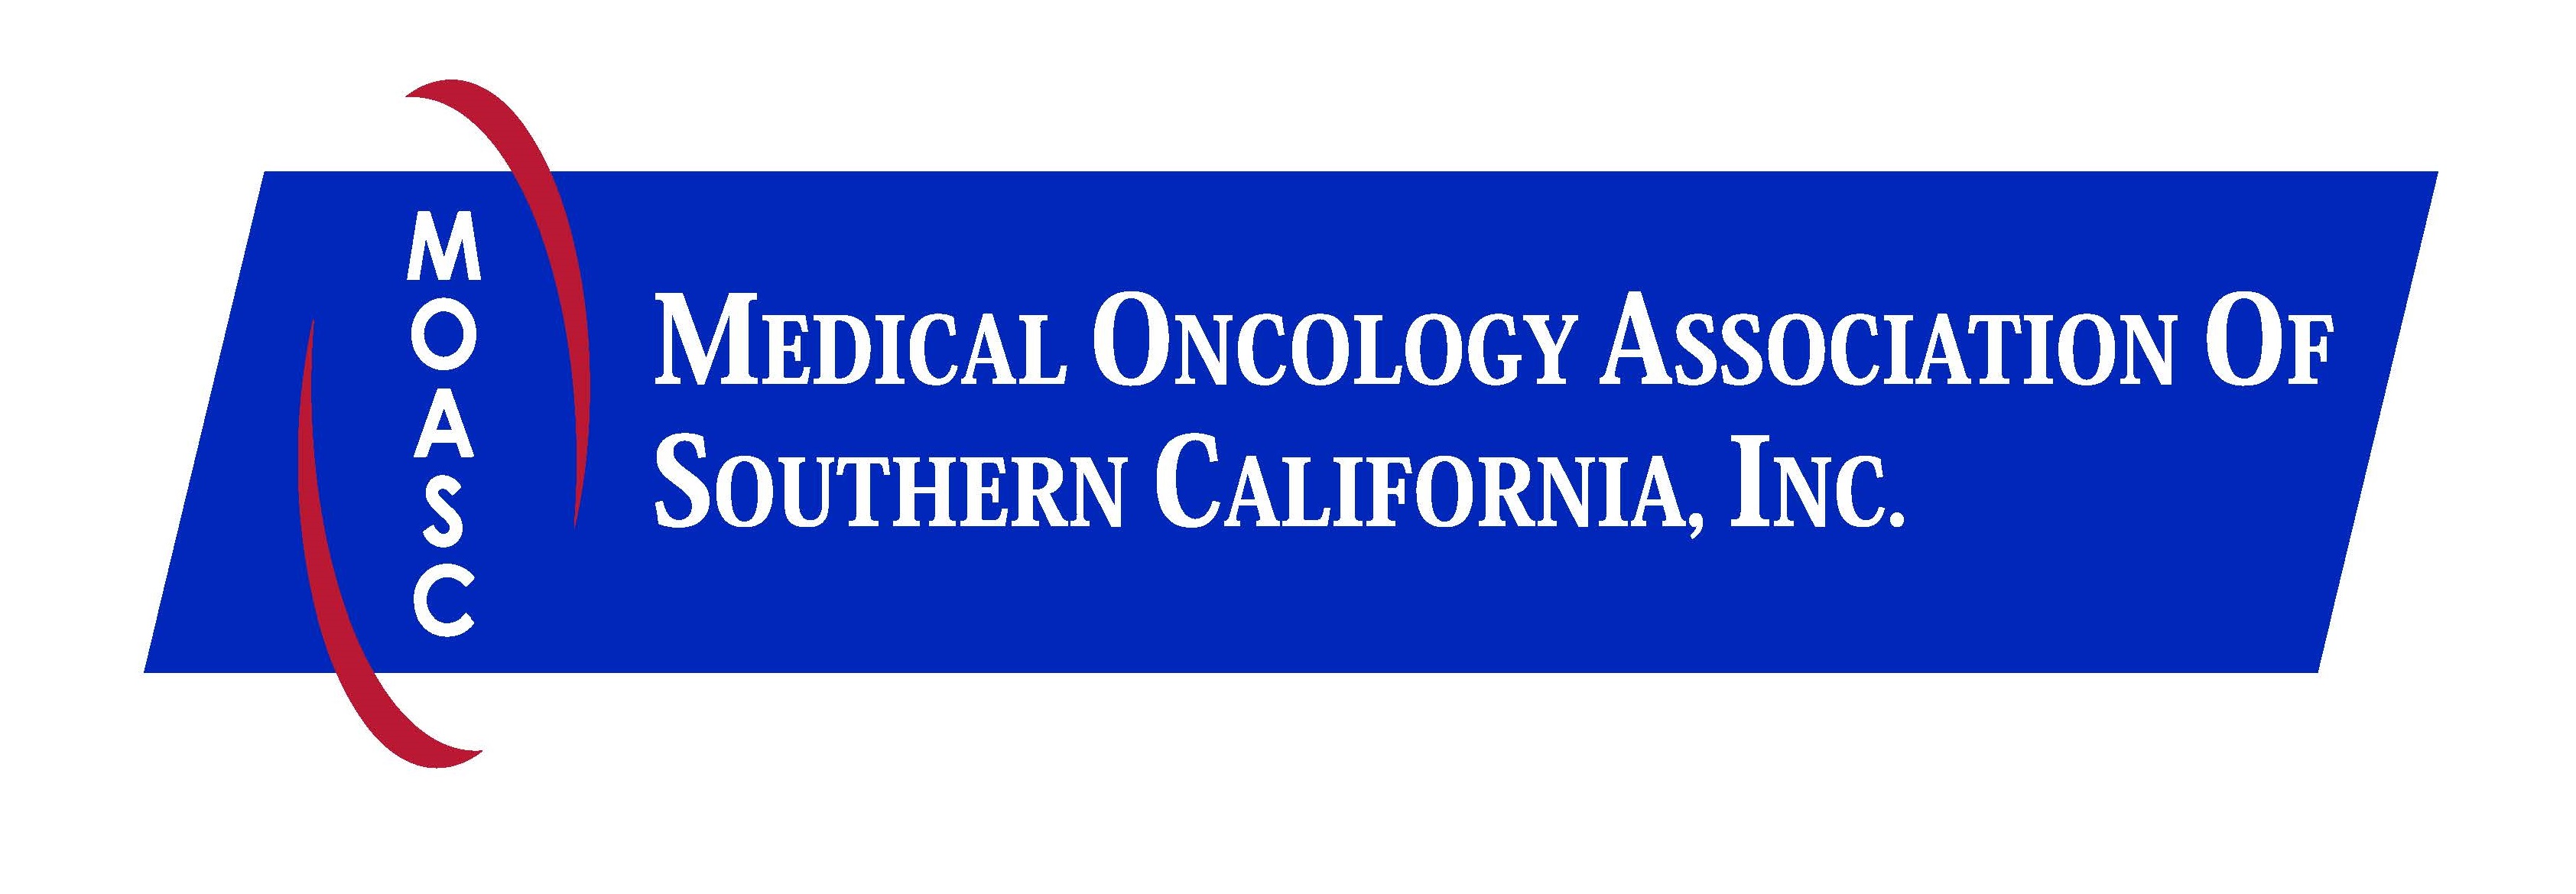 Medical Oncology Association of Southern California